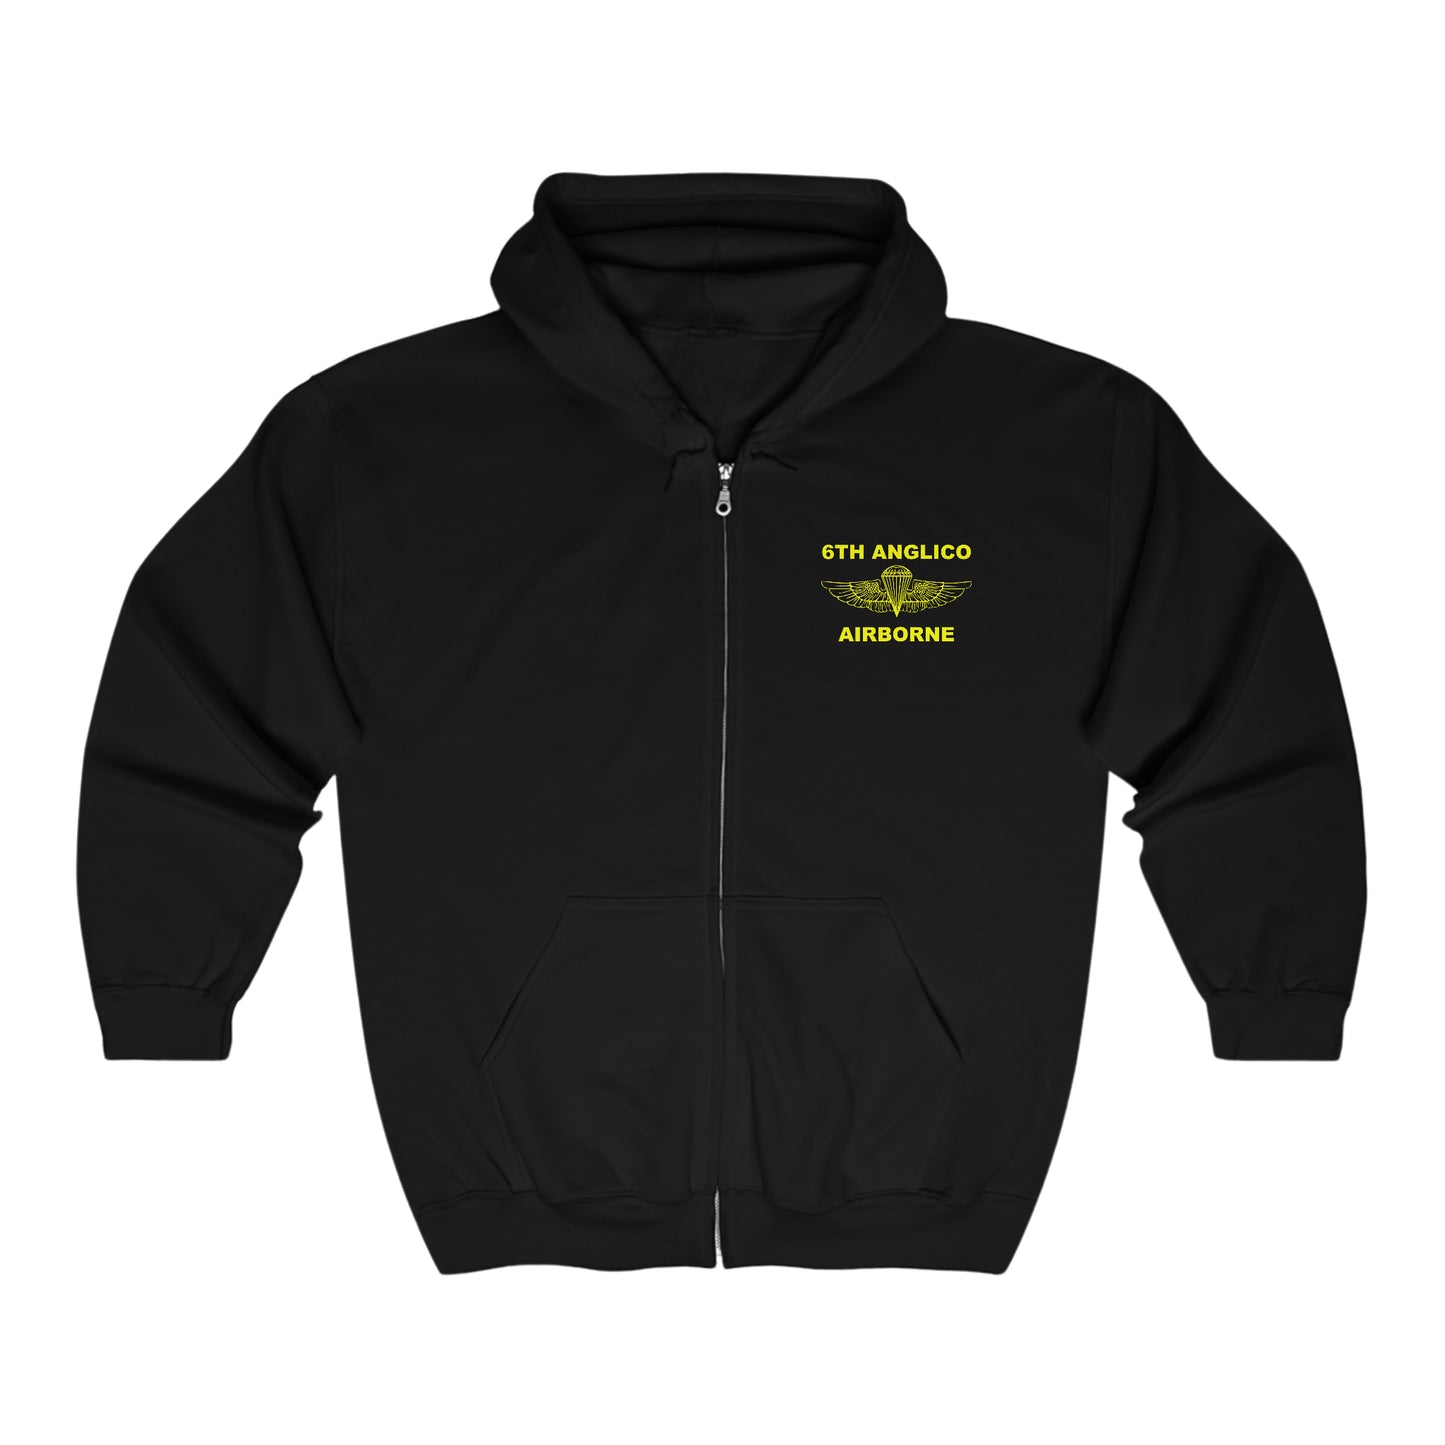 6th ANGLICO Retro Zip Hoodie